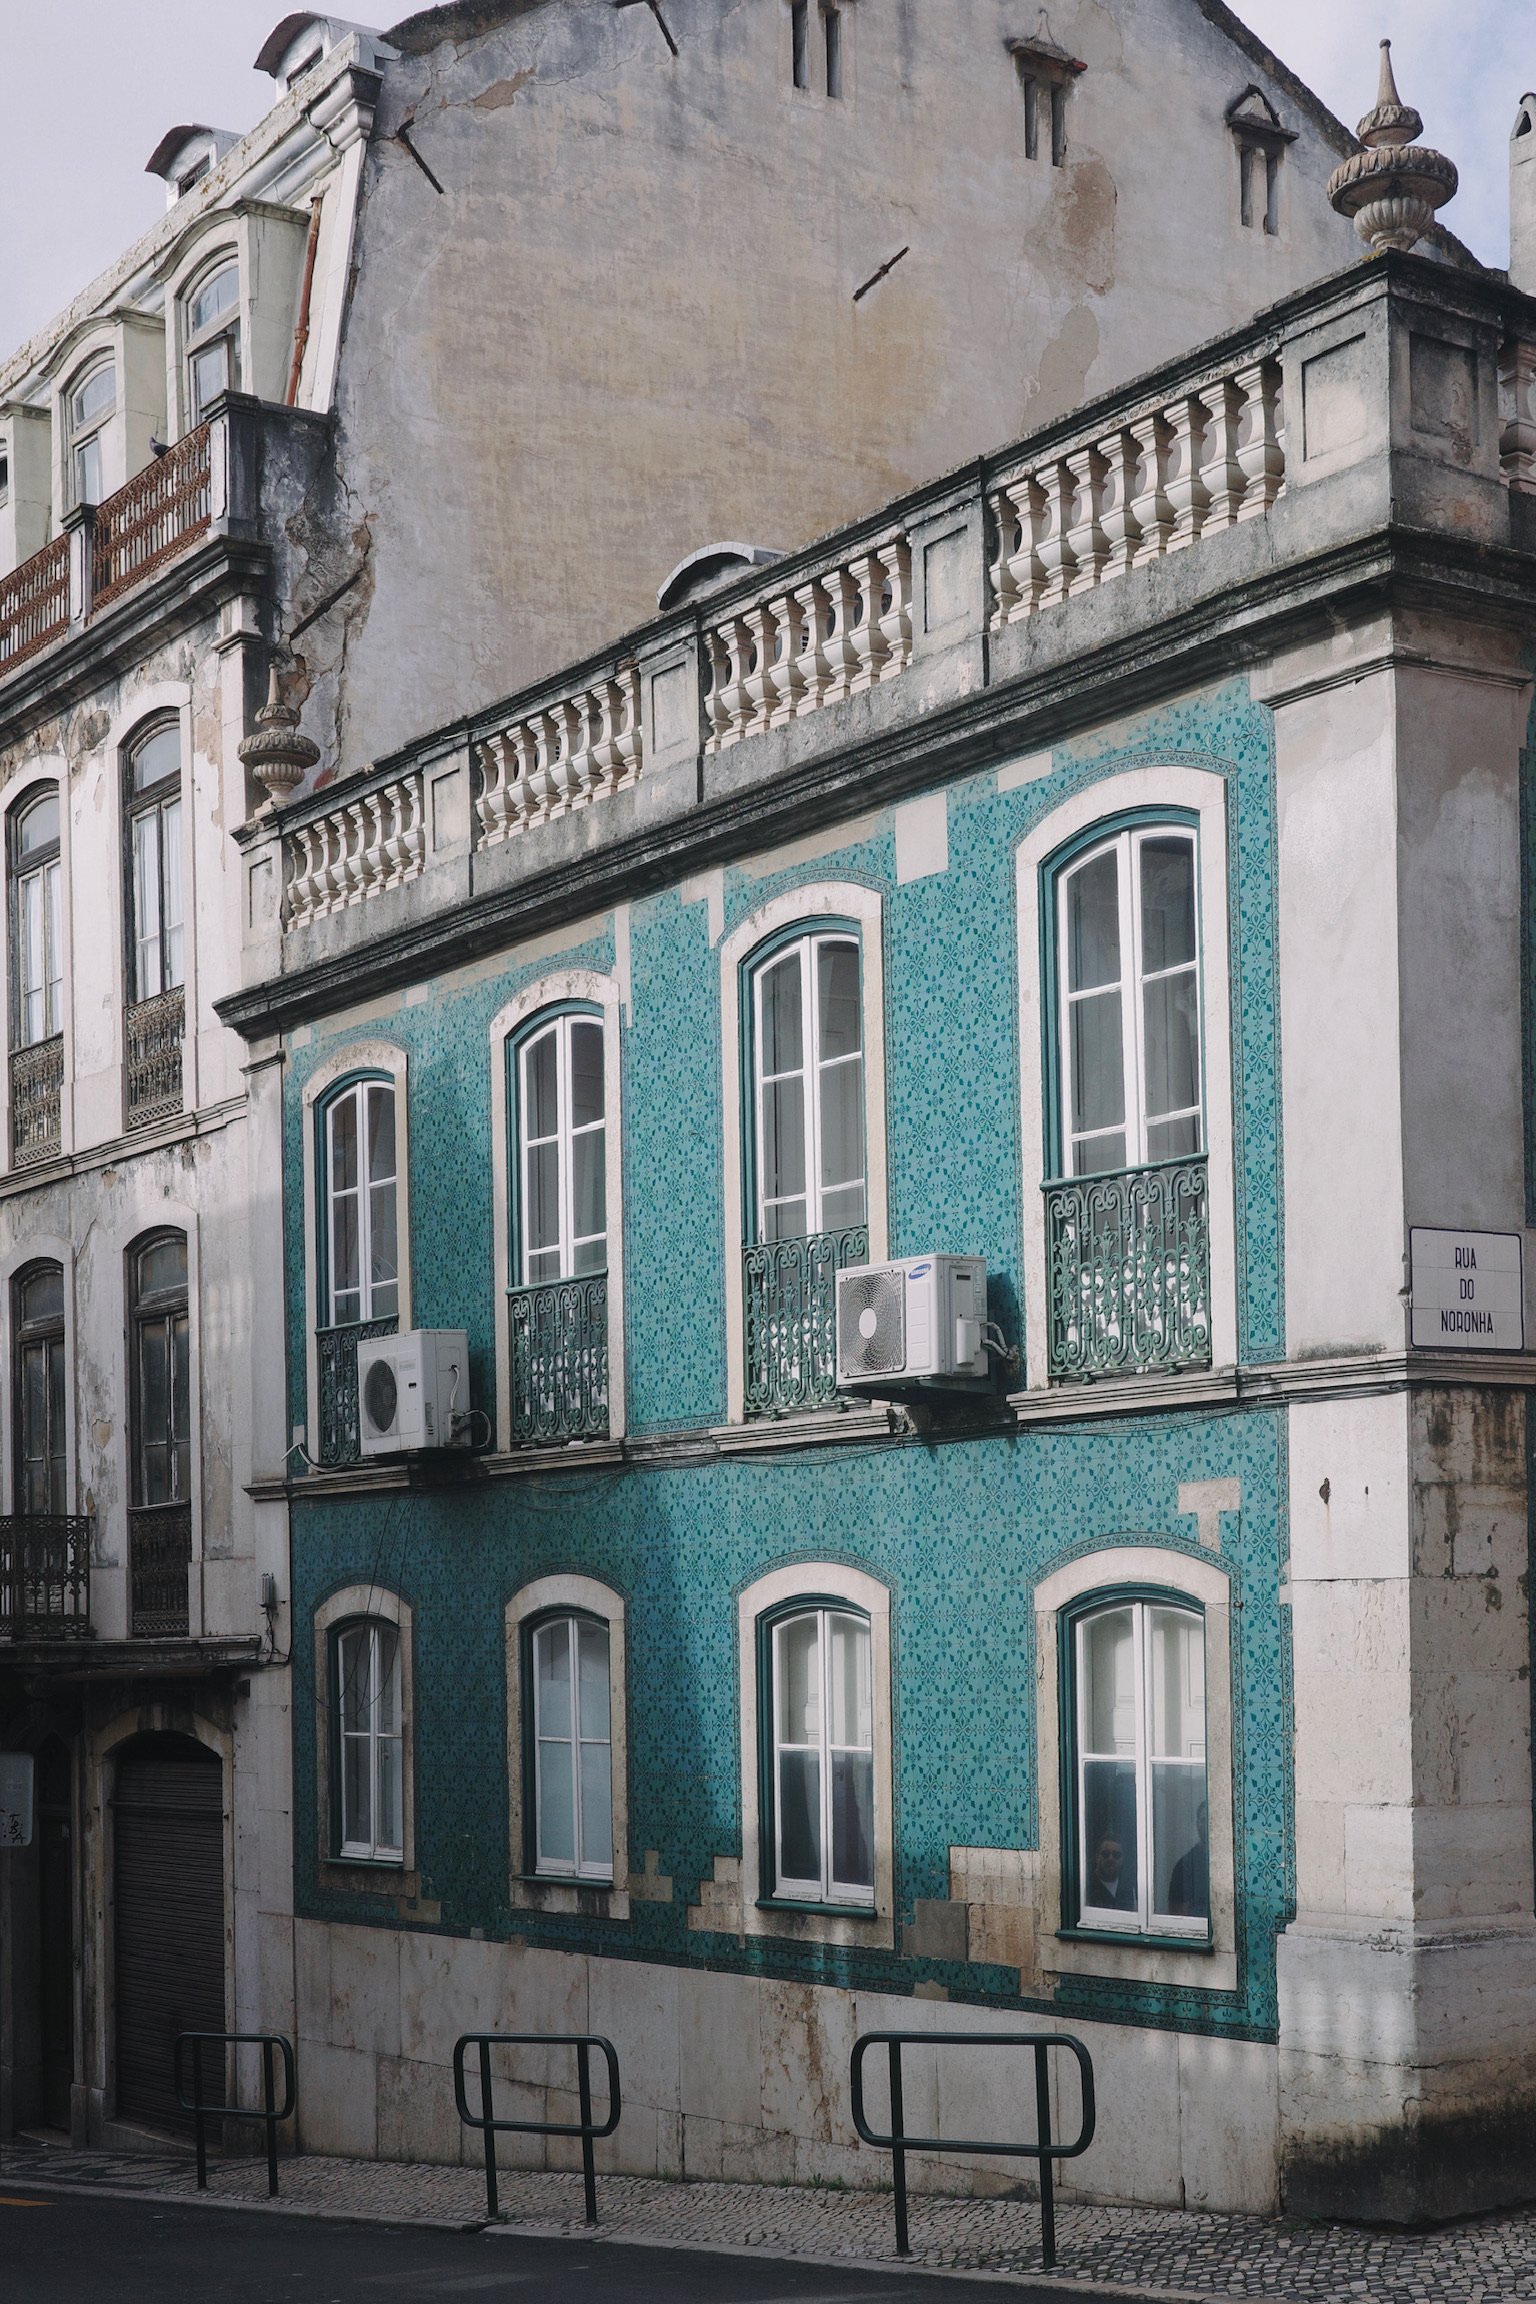 Teal tiled 2-story building with tall windows and outside AC units.